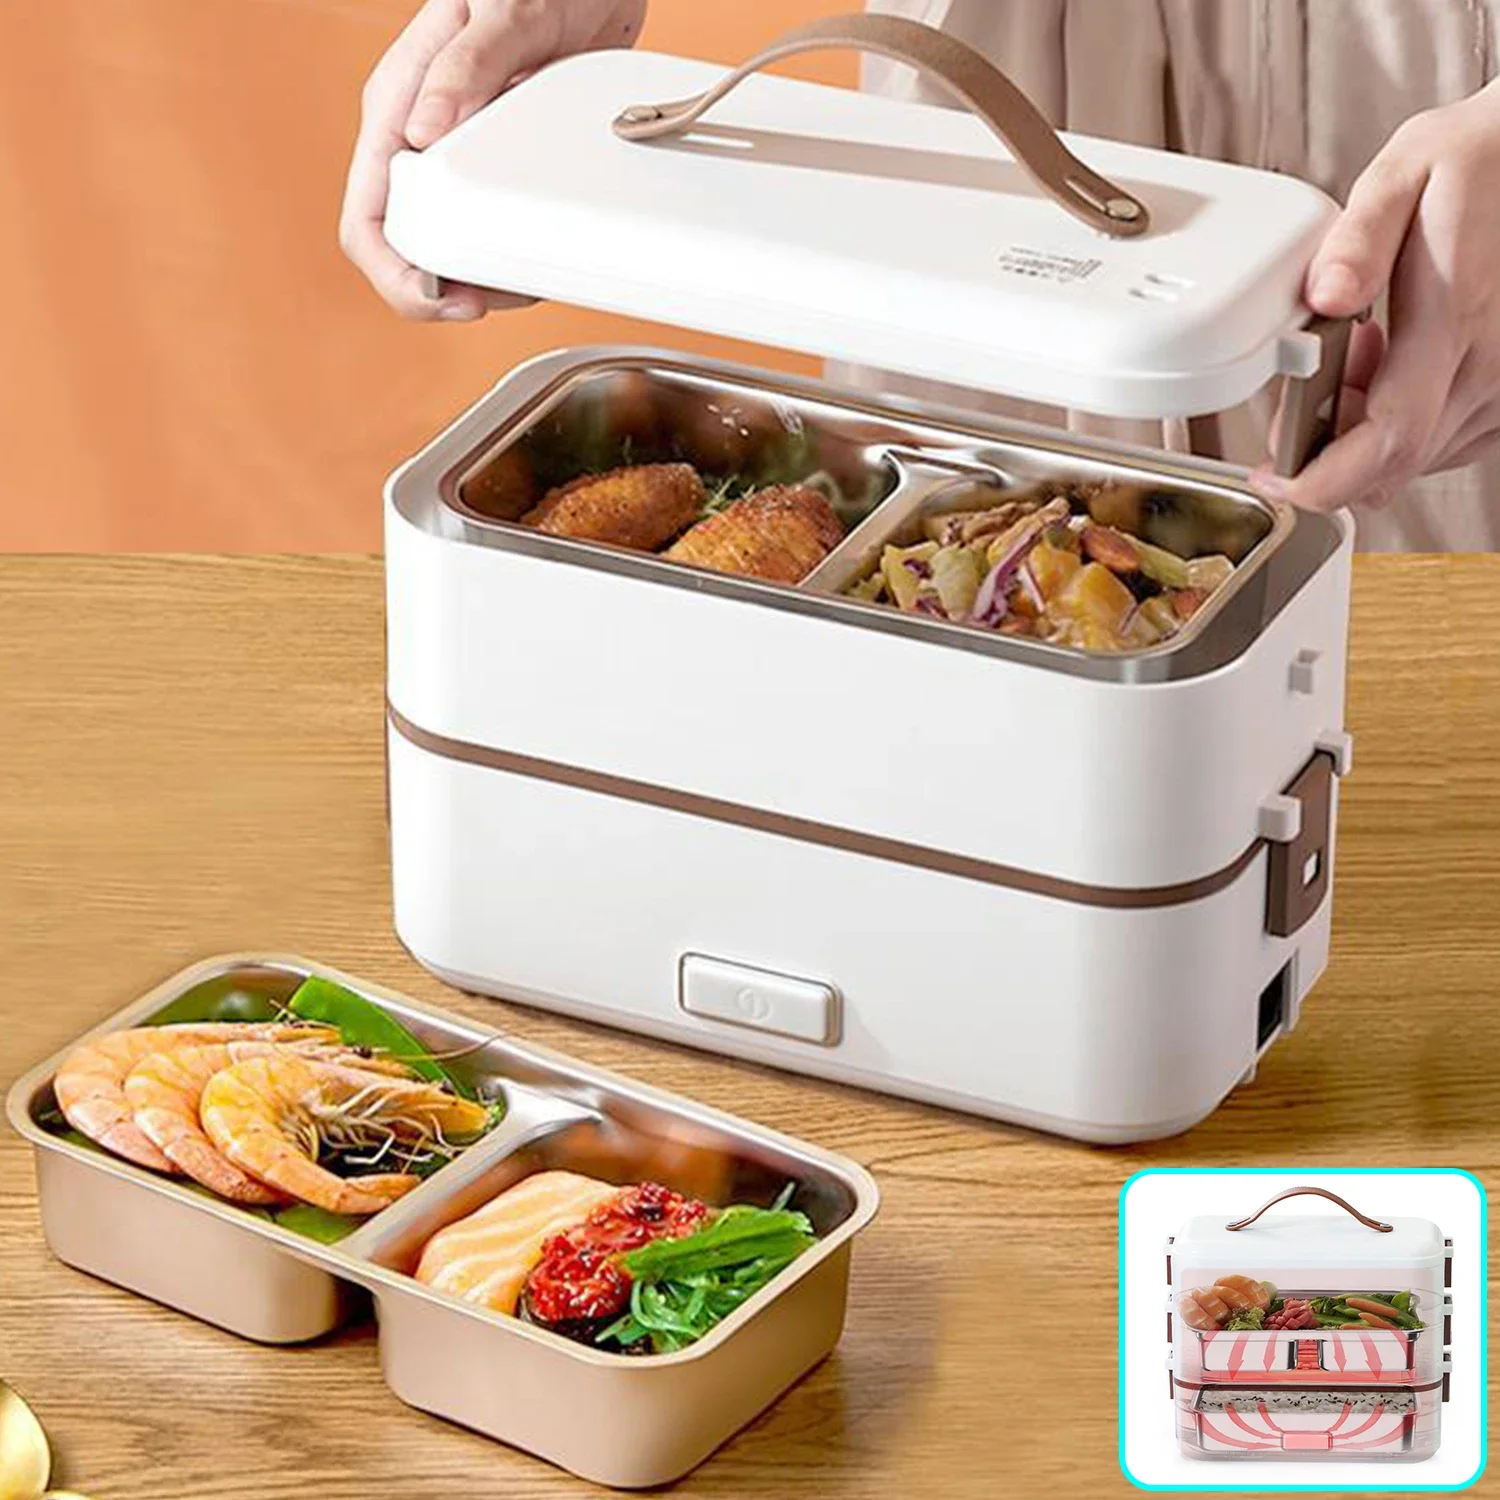 https://ae01.alicdn.com/kf/Se53c5a47f5374edc8583823b85118513w/Lunch-Box-Electric-Heated-Thermal-Lunch-Box-Multilayer-Layers-Portable-Food-Warmer-LunchBox-for-Car-Truck.jpg